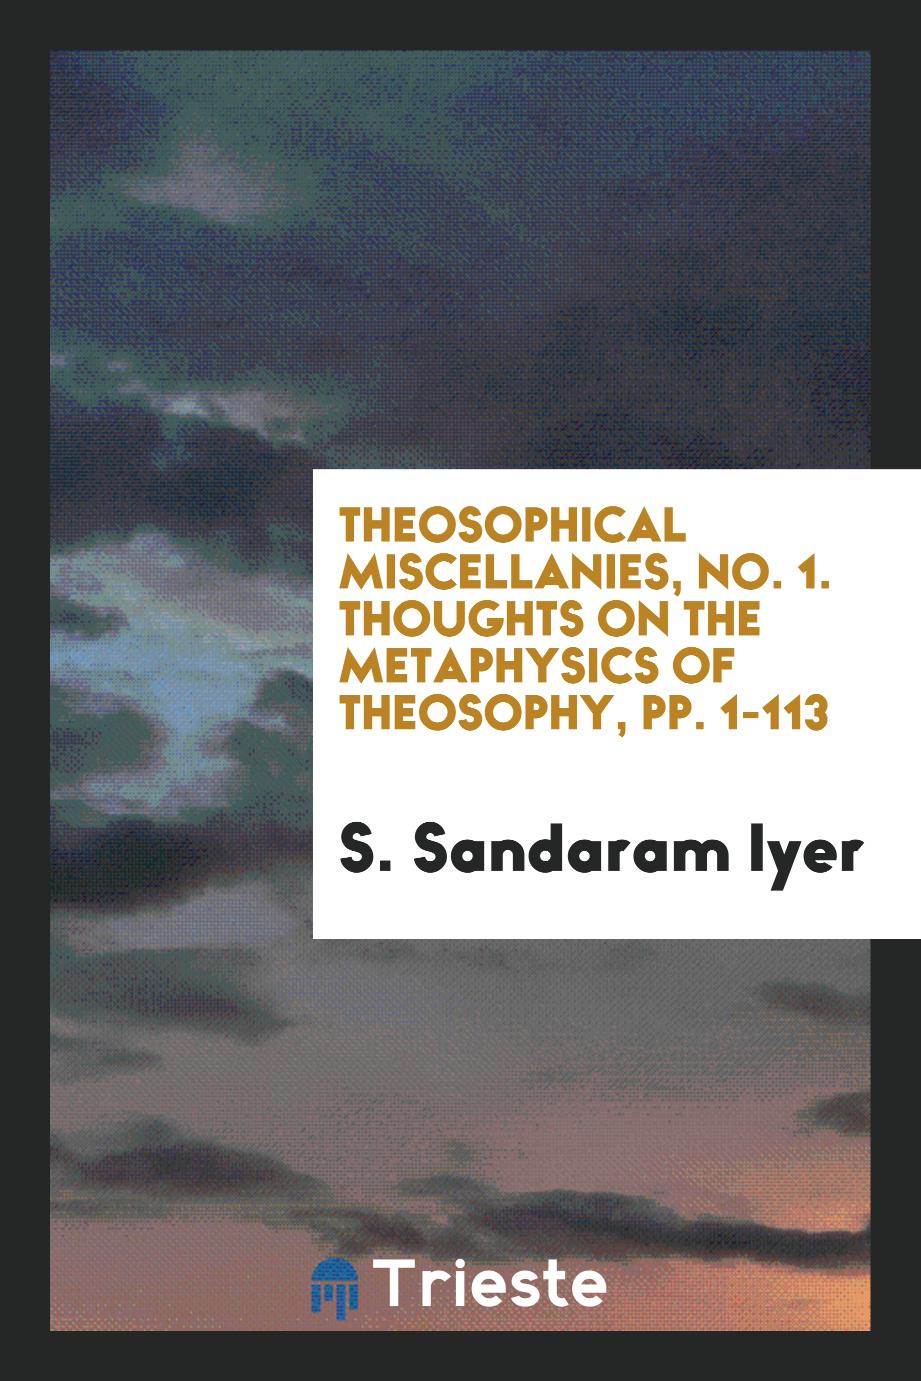 Theosophical Miscellanies, No. 1. Thoughts on the Metaphysics of Theosophy, pp. 1-113